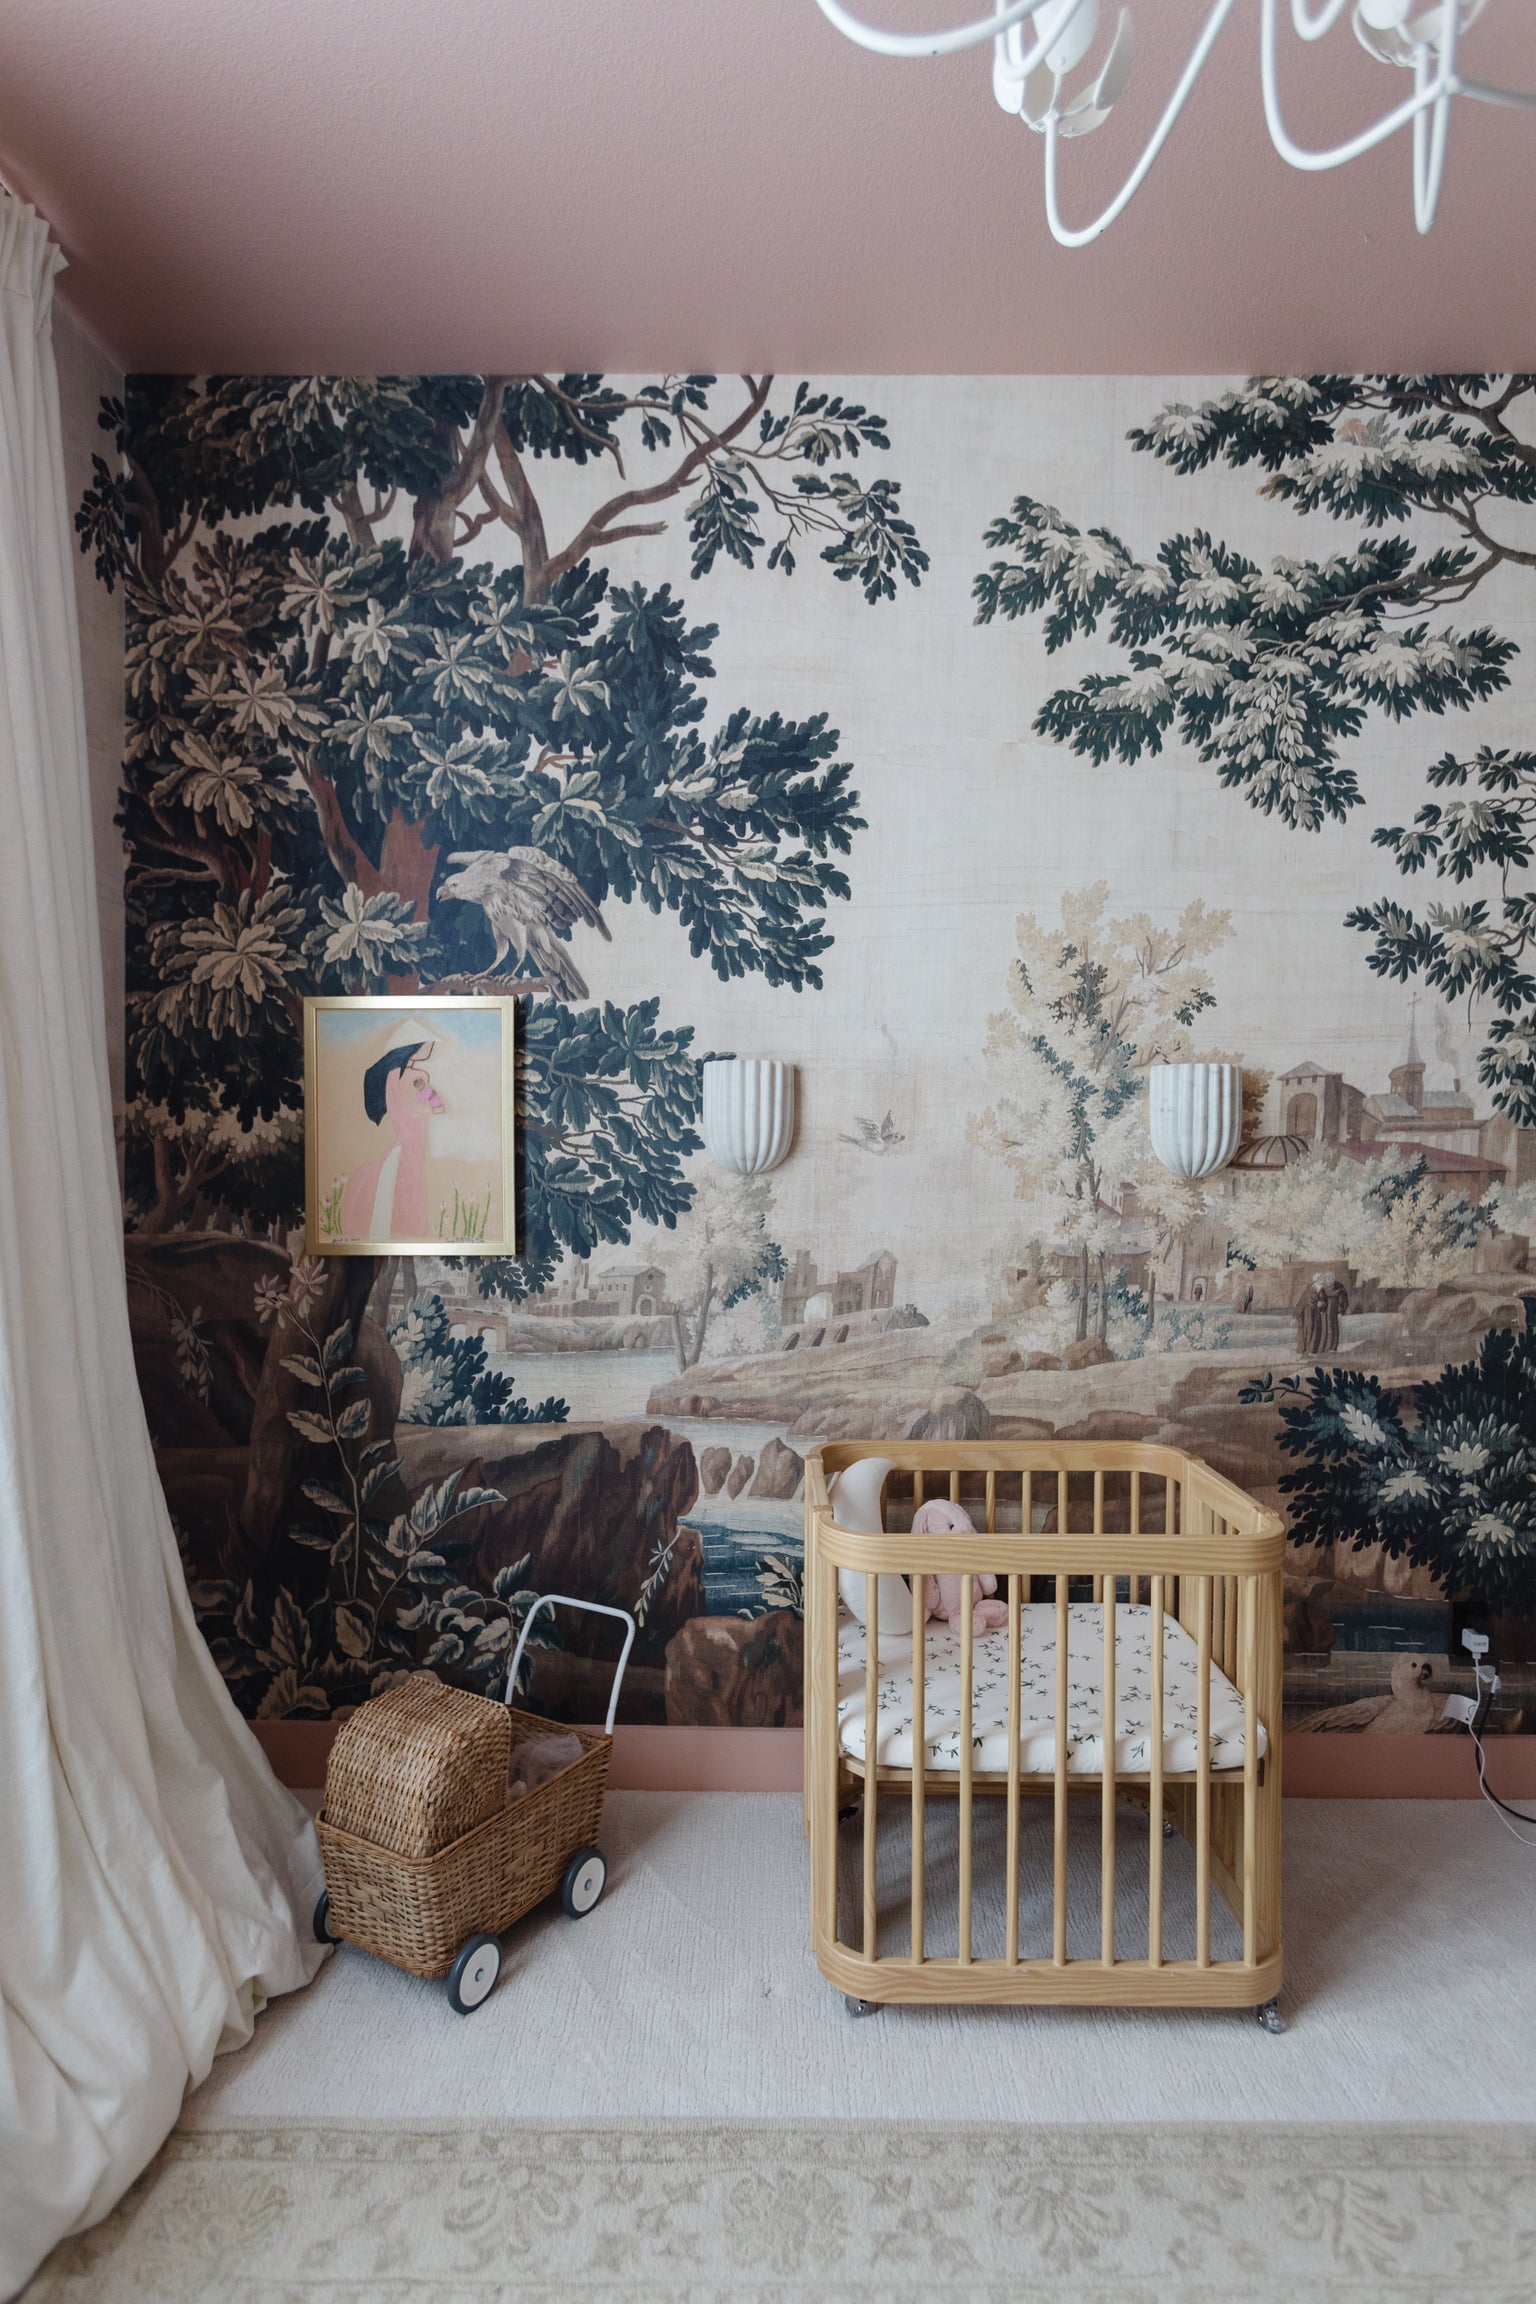 This Nursery is a Maximalist, Whimsical Dream